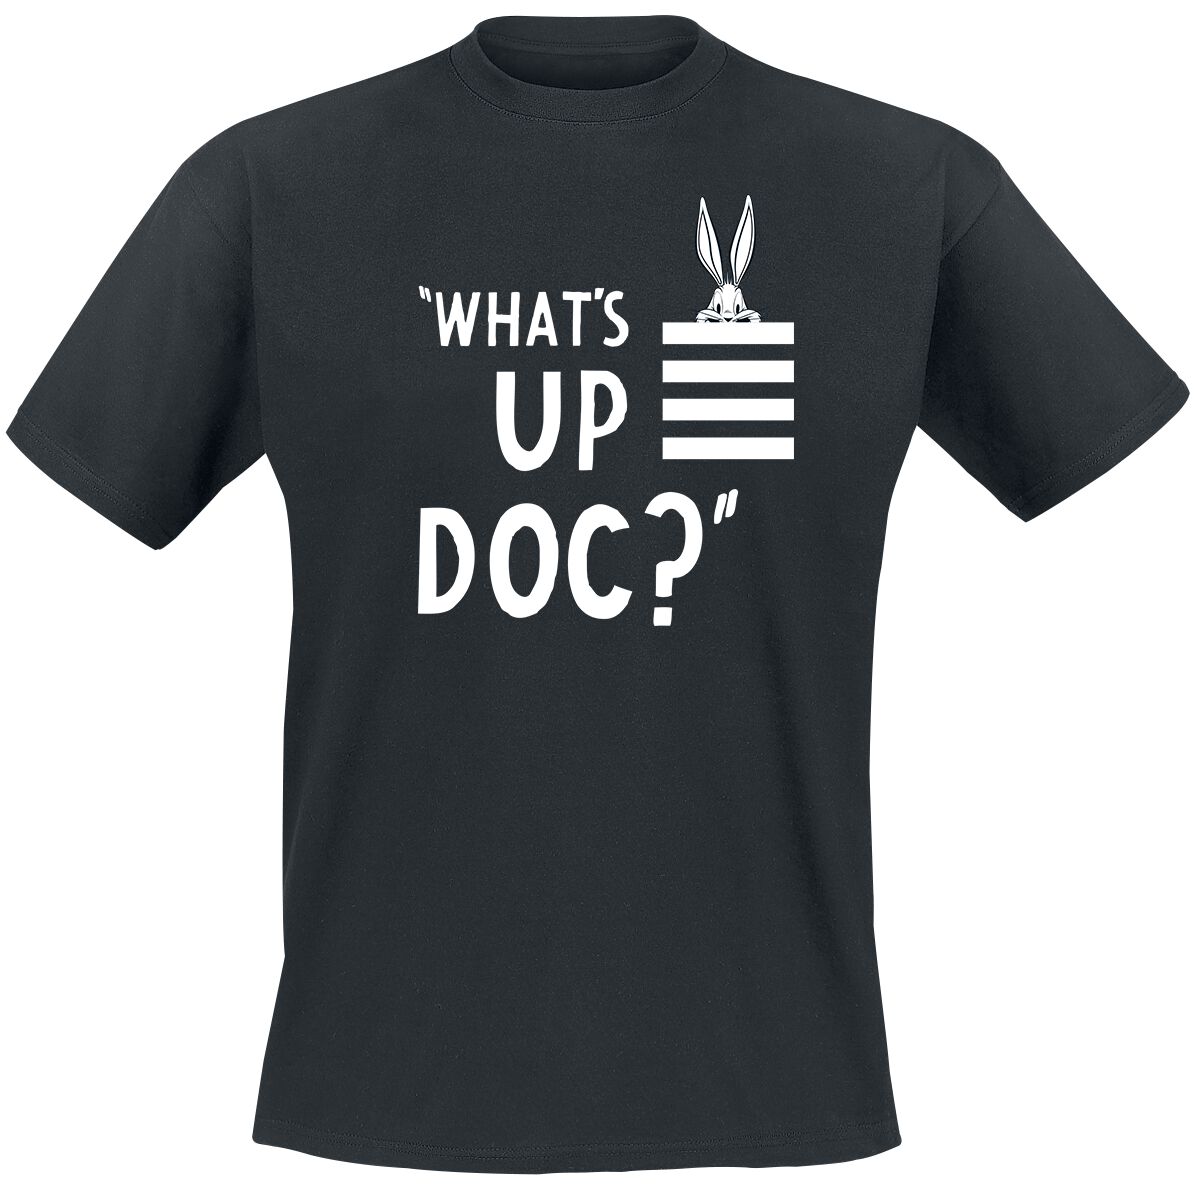 Looney Tunes Bugs Bunny - What's Up, Doc? T-Shirt black